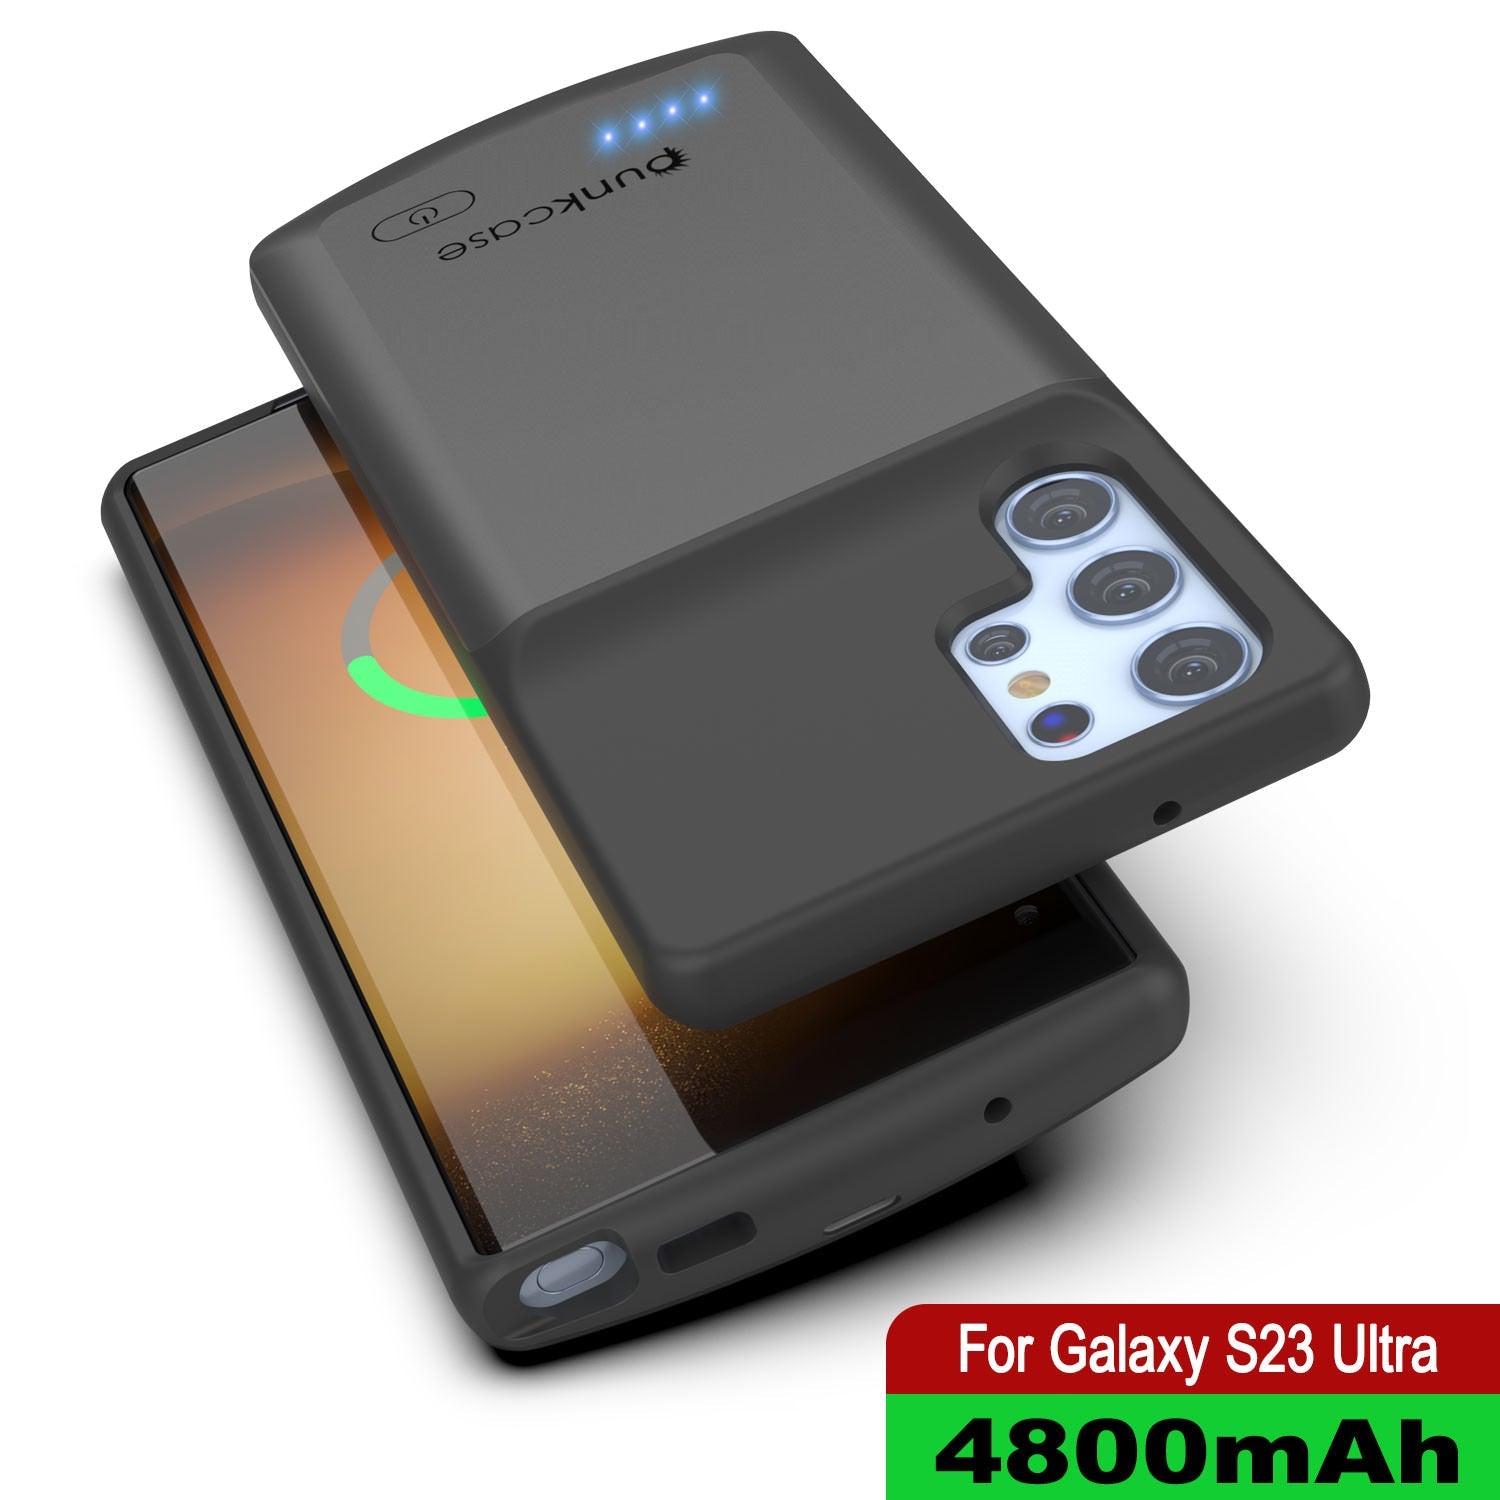 PunkJuice S24 Battery Case Grey - Portable Charging Power Juice Bank with 4500mAh